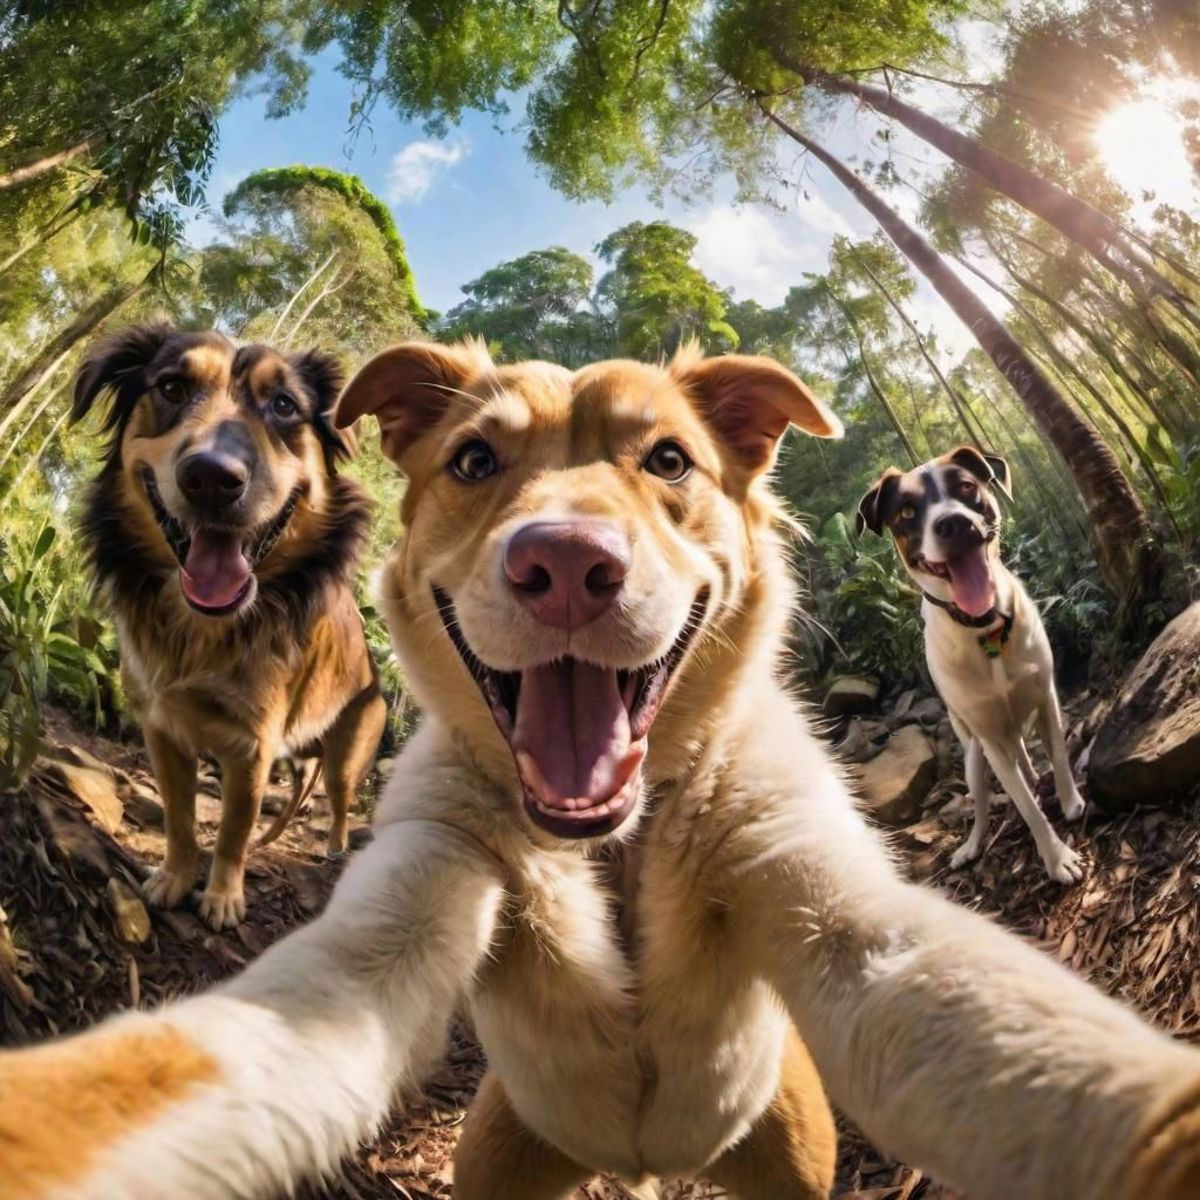 Three dogs posing for a photo together in the woods.